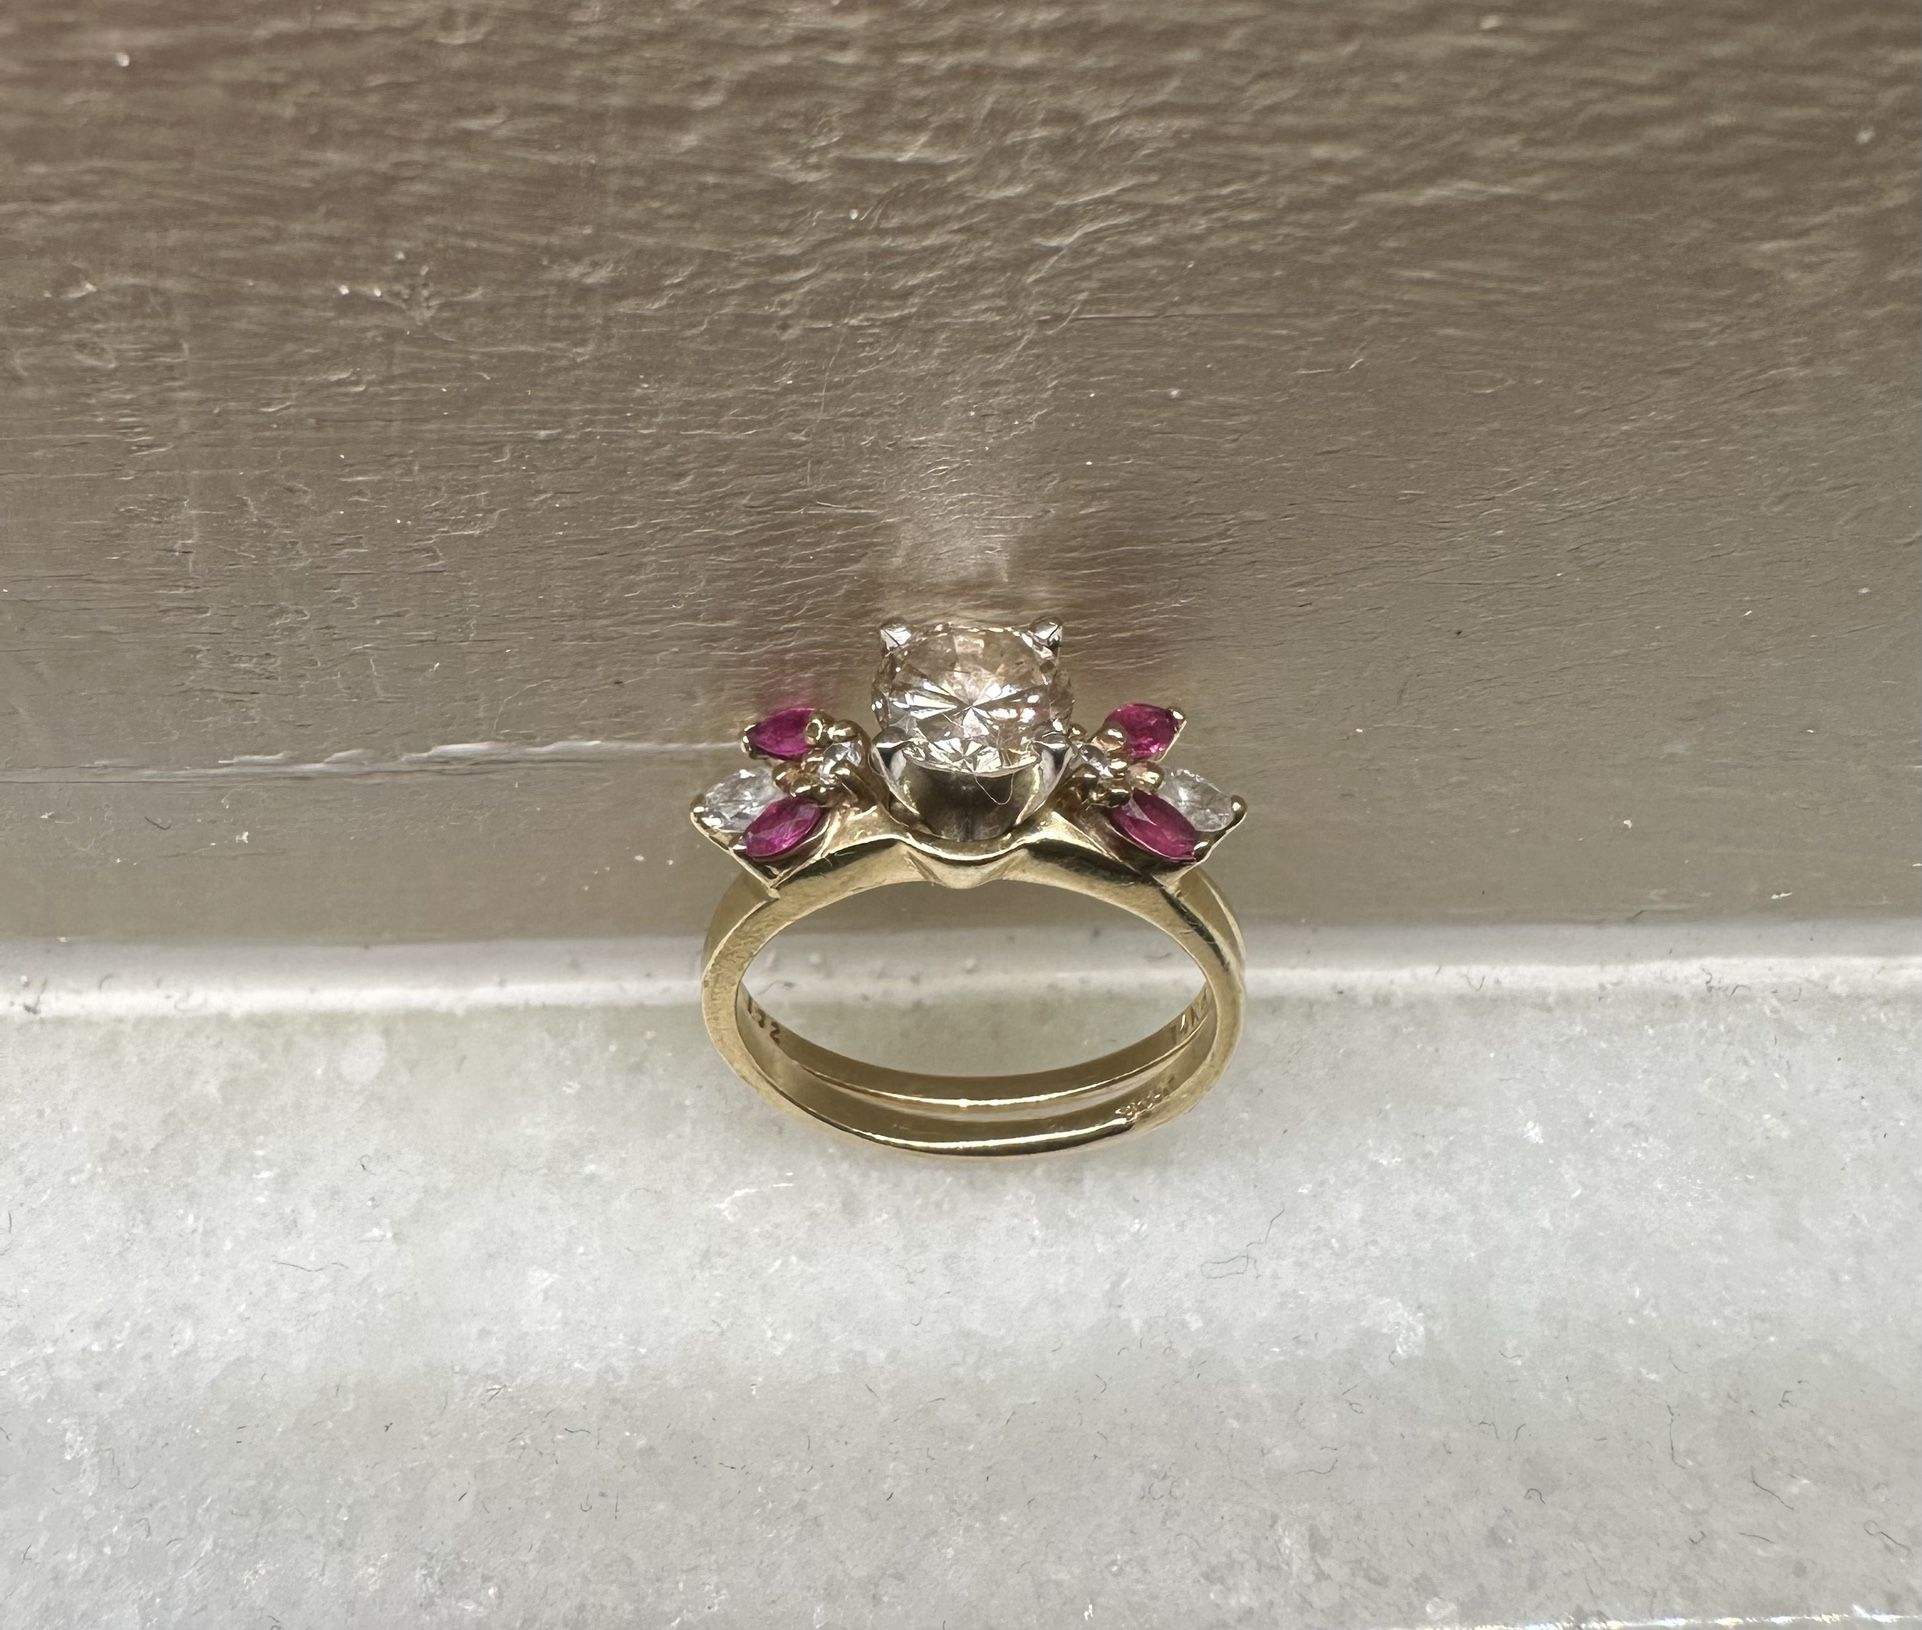 1.02 Carat Diamond Ring With Ruby, 14kt Wedding Set! Natural Cut Diamonds! One Day Sale!